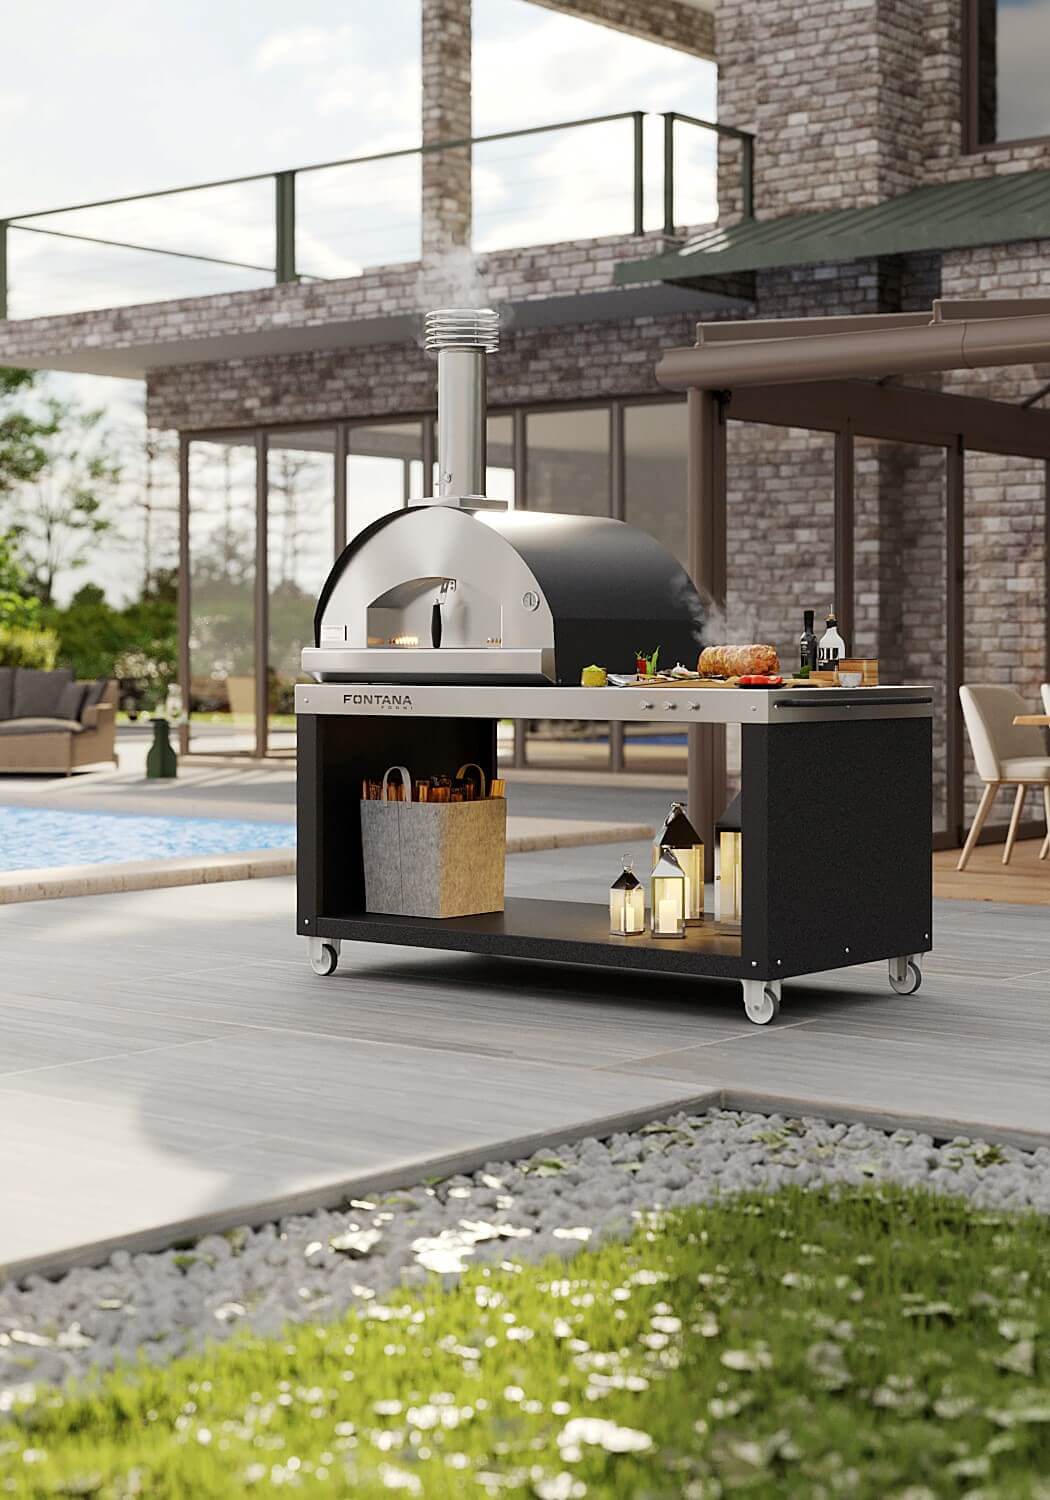 The fastest outdoor kitchen in the world: Fontana Pizza Desk